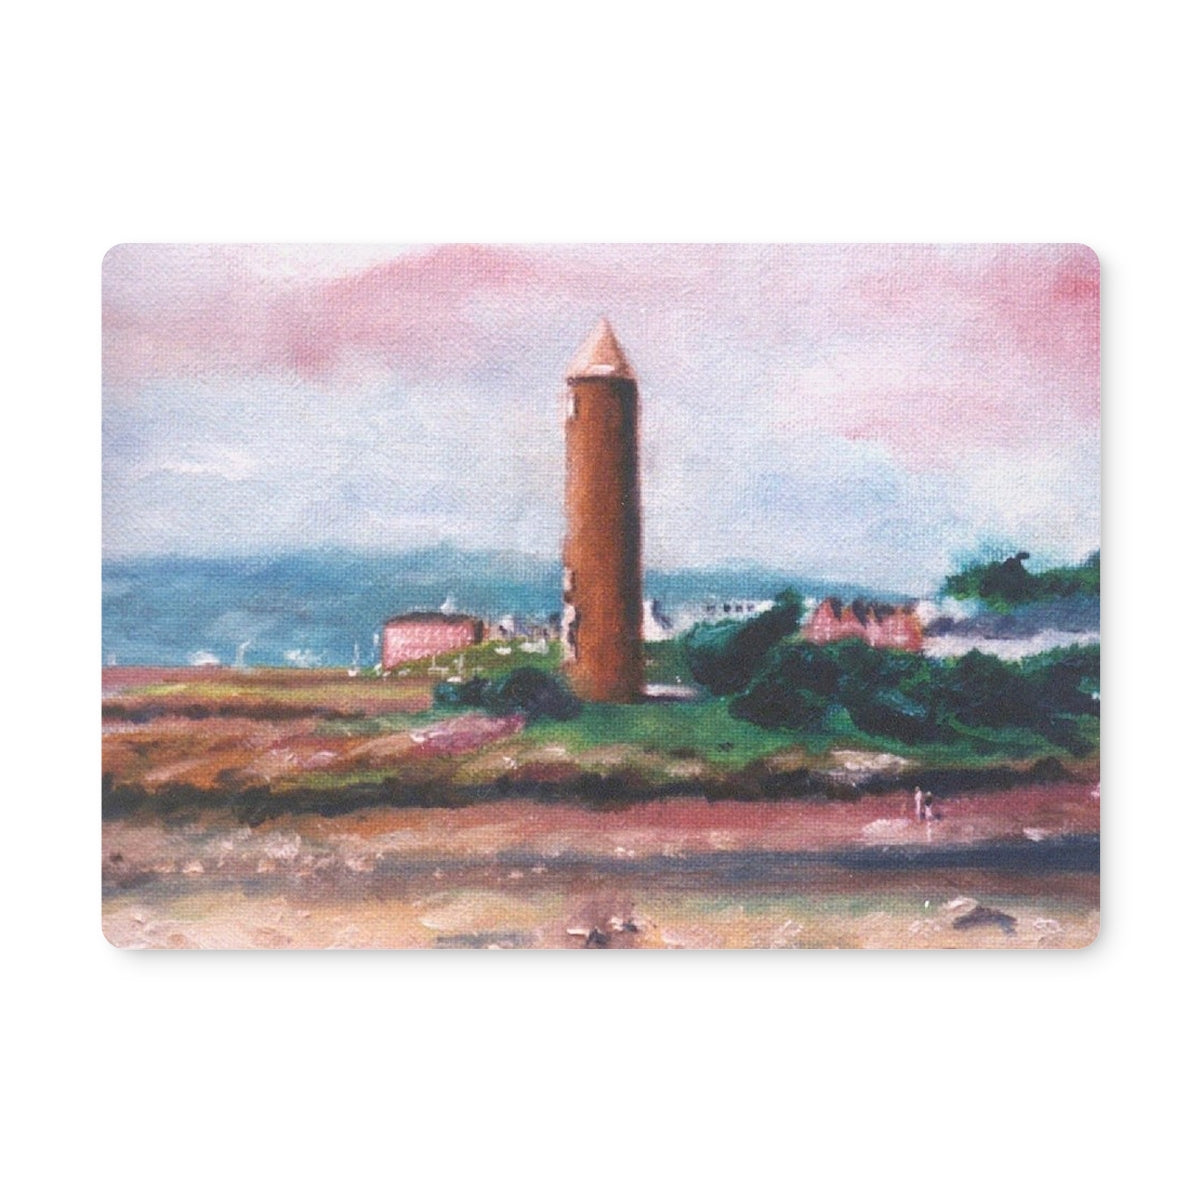 Pencil Point Largs Art Gifts Placemat-Placemats-River Clyde Art Gallery-Single Placemat-Paintings, Prints, Homeware, Art Gifts From Scotland By Scottish Artist Kevin Hunter